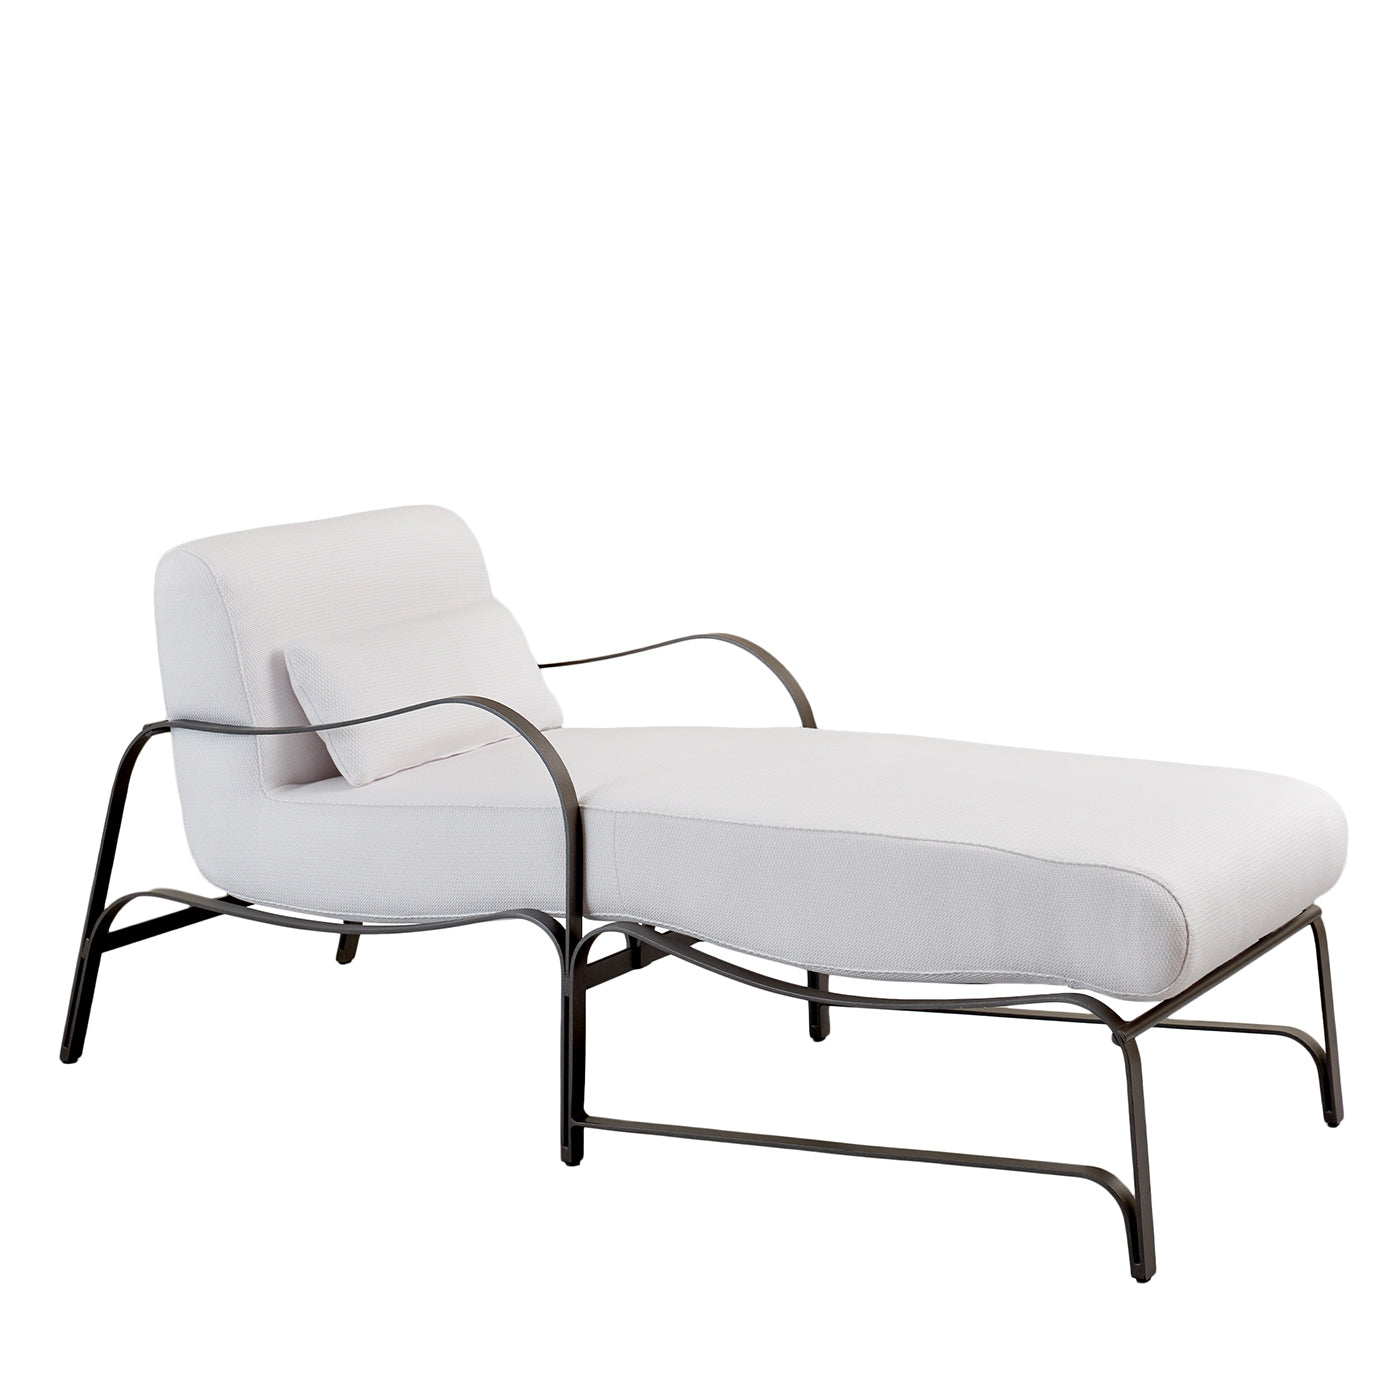 Amalfi White and Gray Chaise Longue by Studio 63 in Stainless Steel - Main view